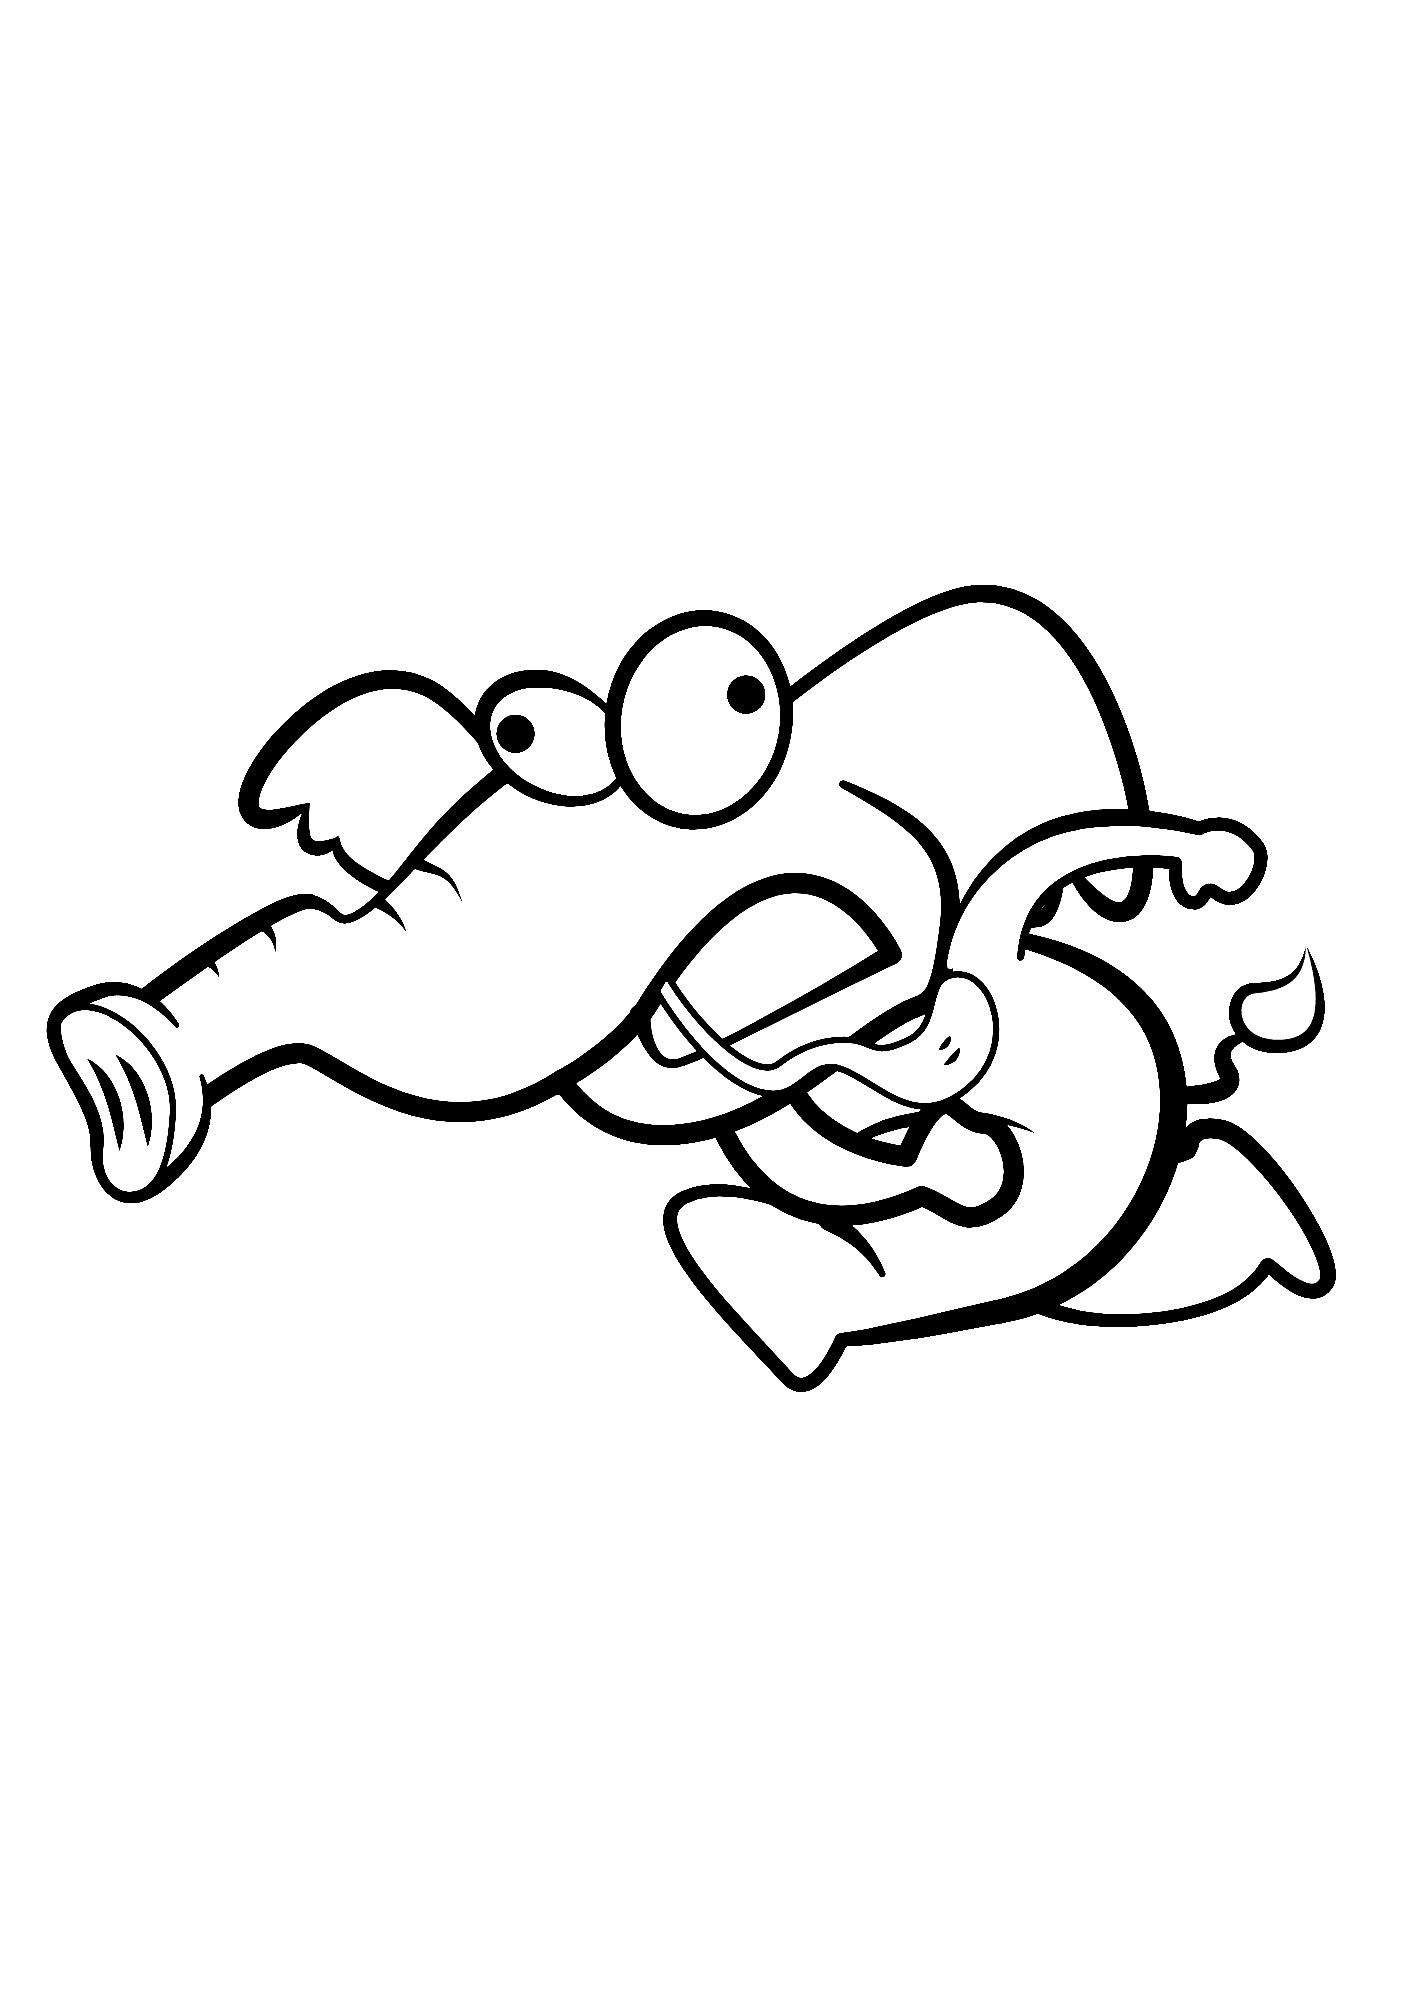 Elephant Running Coloring Page